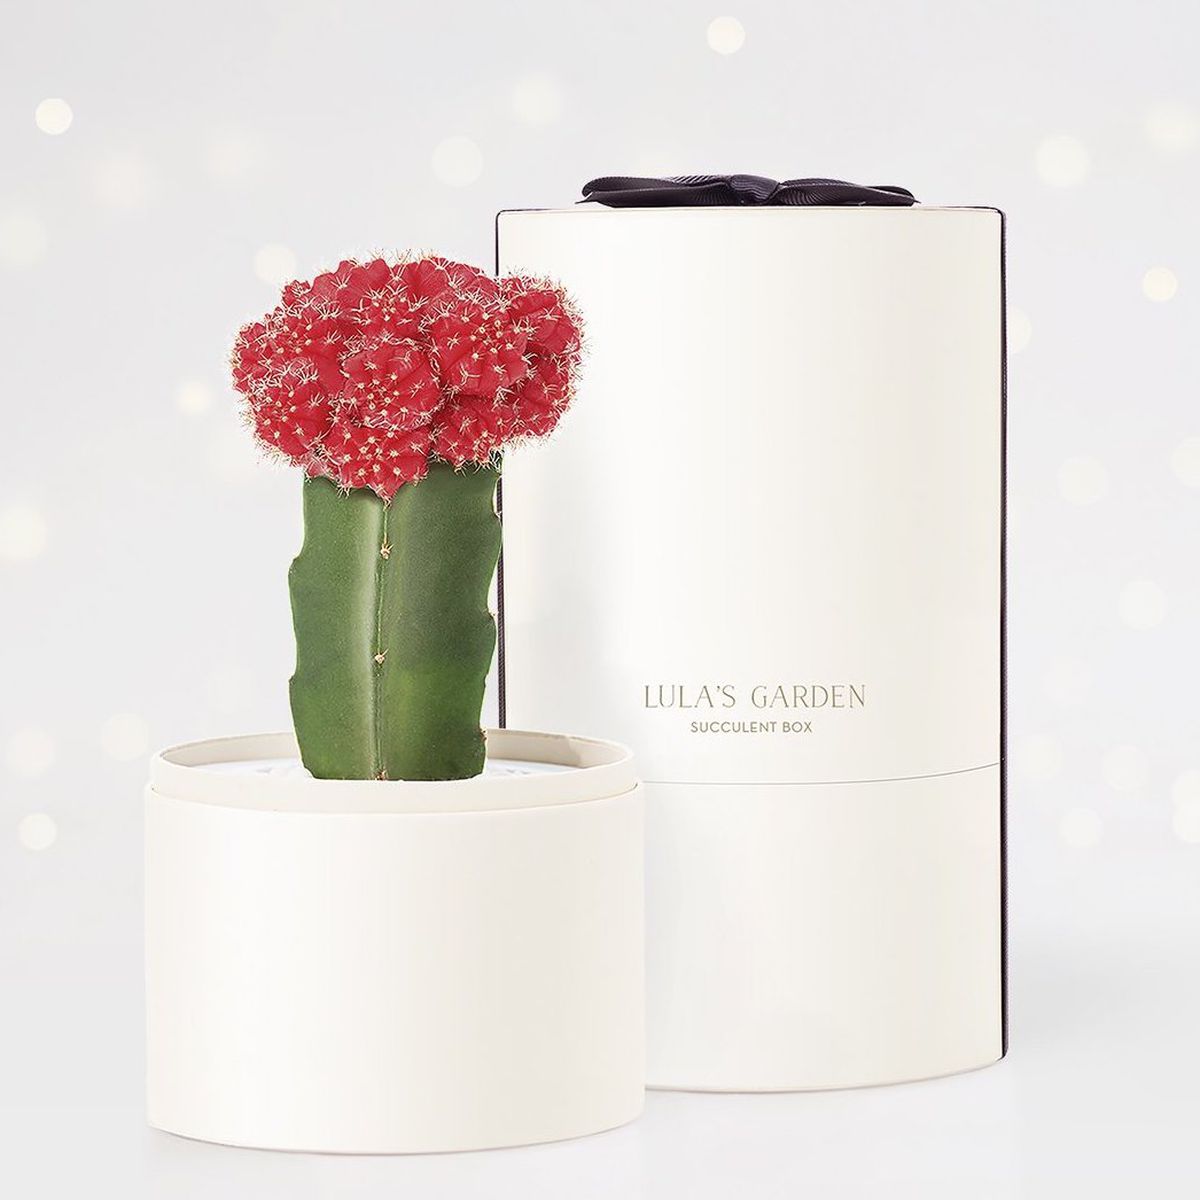 A cactus with a red flower in a round white box.